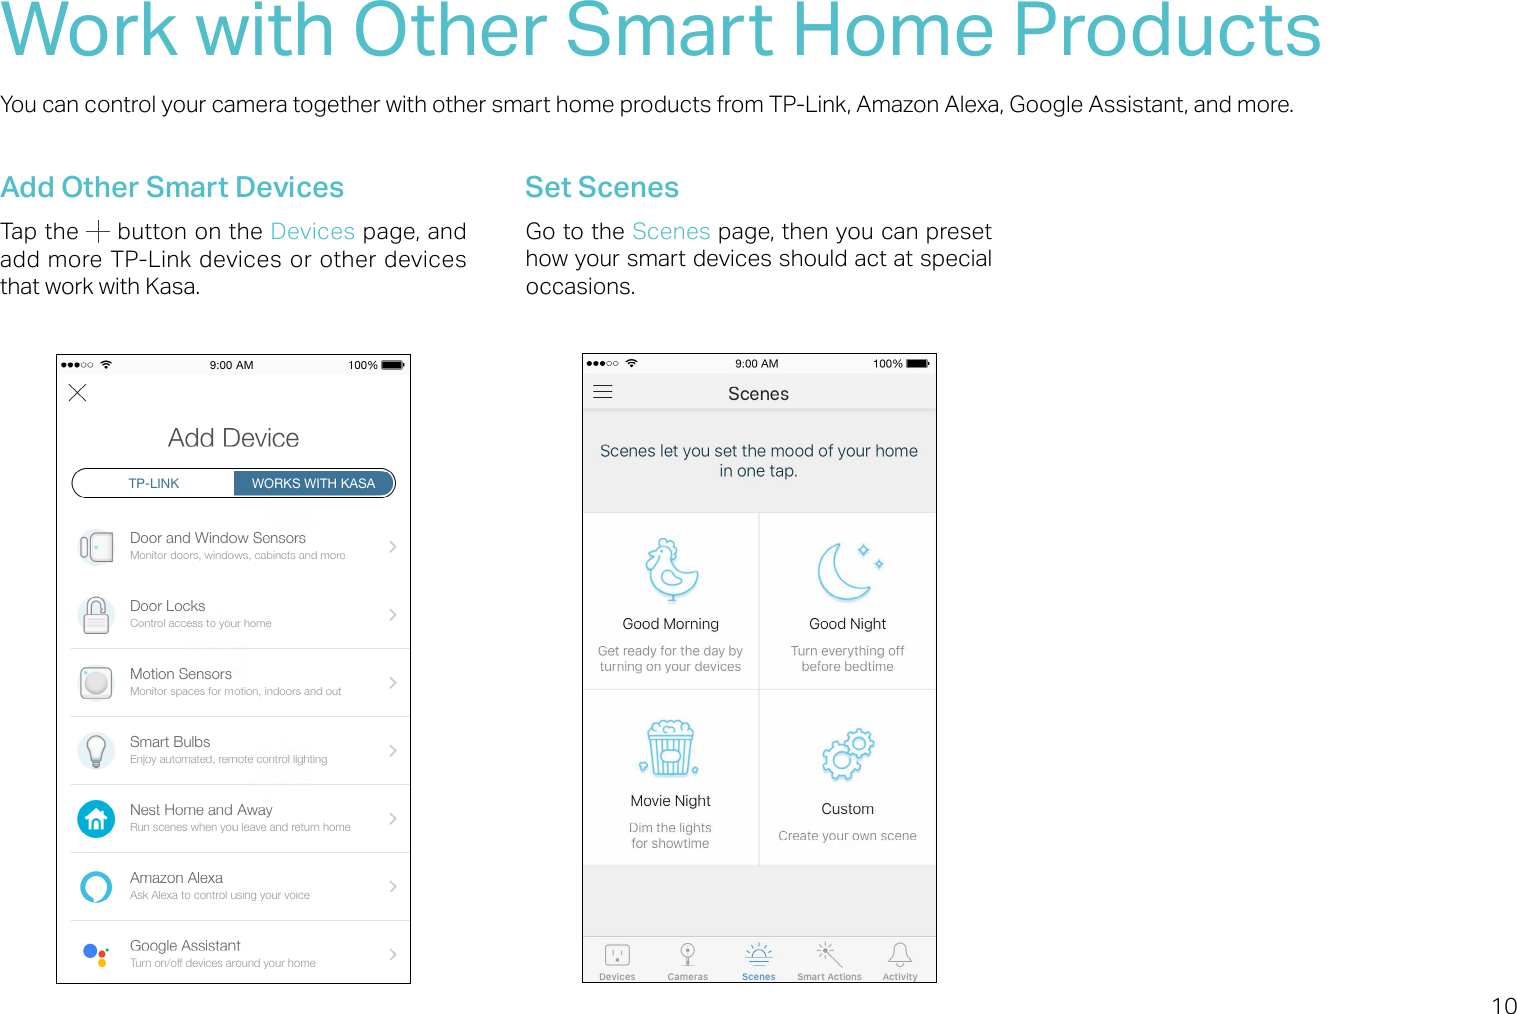 10Work with Other Smart Home ProductsYou can control your camera together with other smart home products from TP-Link, Amazon Alexa, Google Assistant, and more. Add Other Smart DevicesTap the   button on the Devices page, and add more TP-Link devices or other devices that work with Kasa.Set ScenesGo to the Scenes page, then you can preset how your smart devices should act at special occasions.